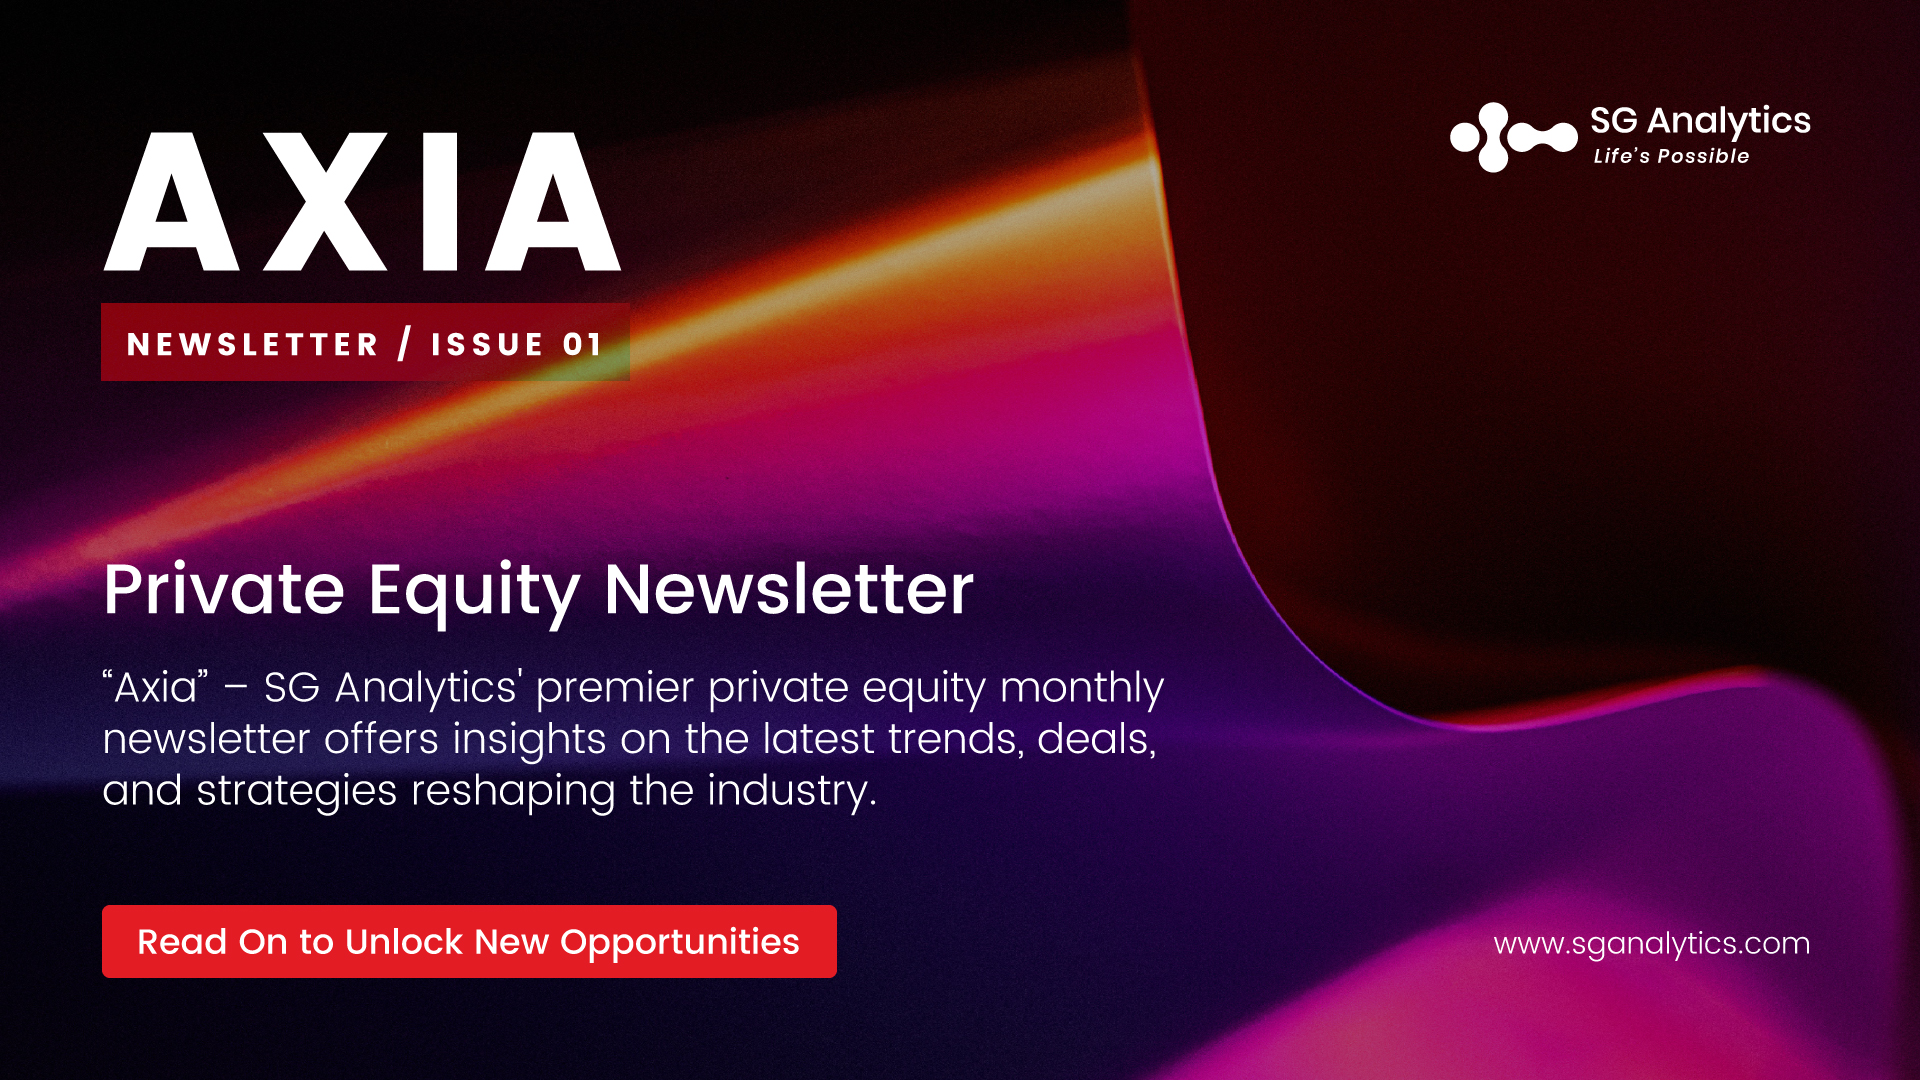 Axia - PE Newsletter 01